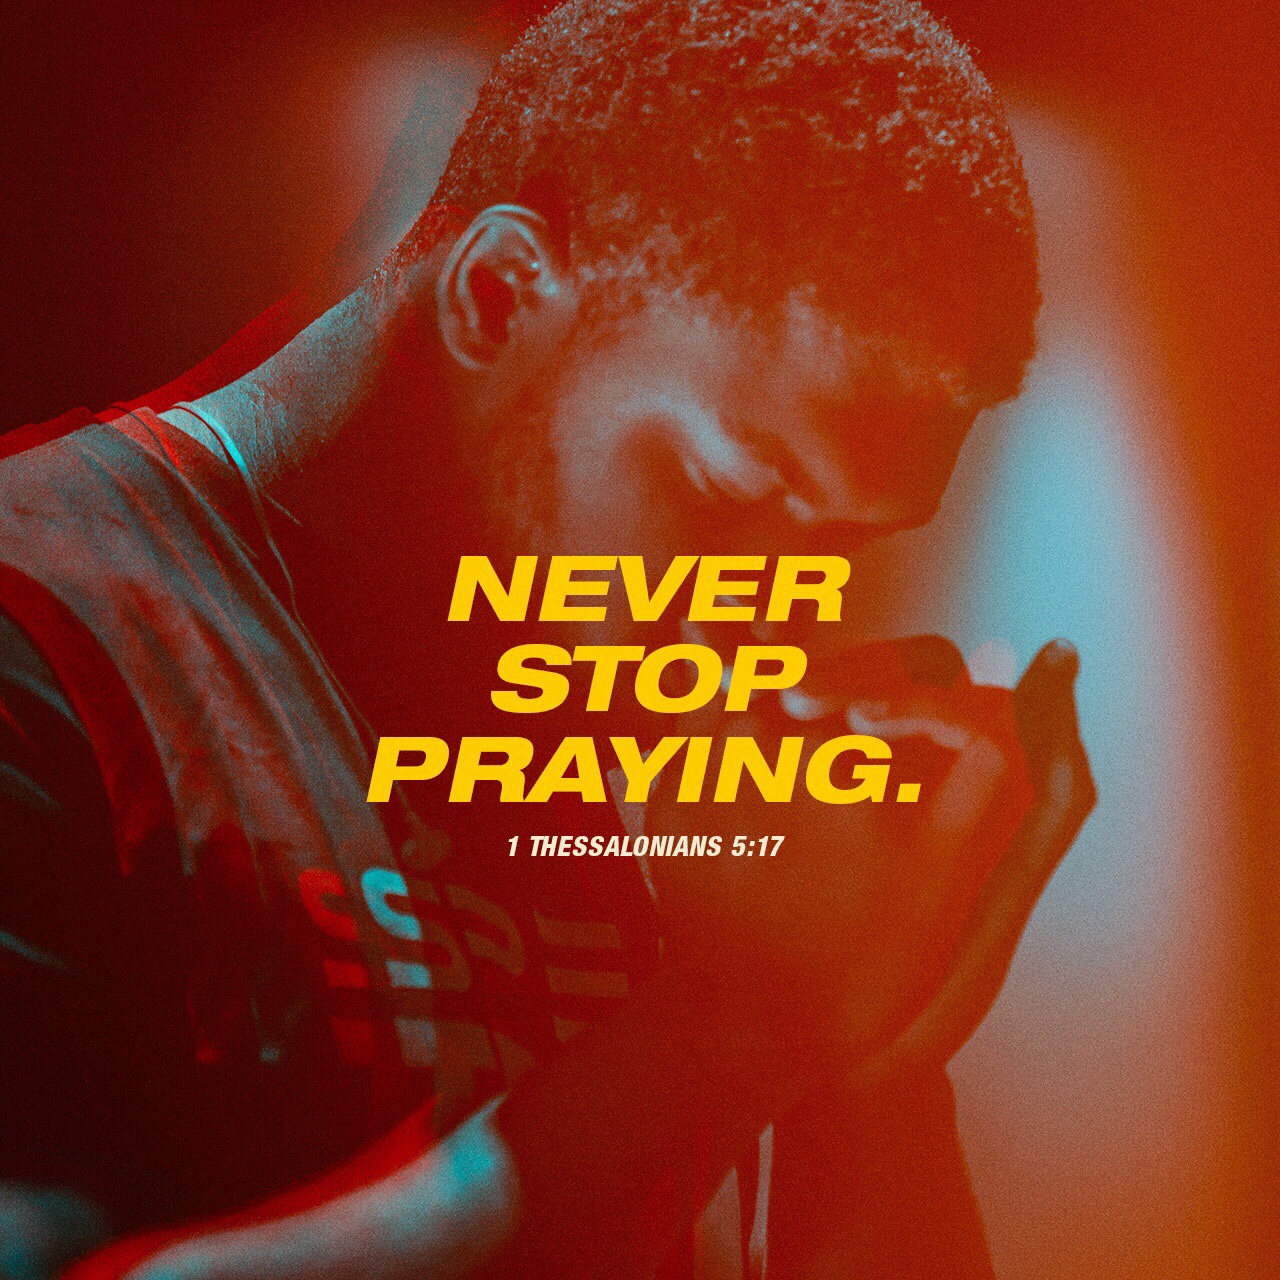 VOTD July 8, 2019 - pray without ceasing. 1 THESSALONIANS‬ ‭5:17‬ ‭NASB‬‬ (Never stop Praying)